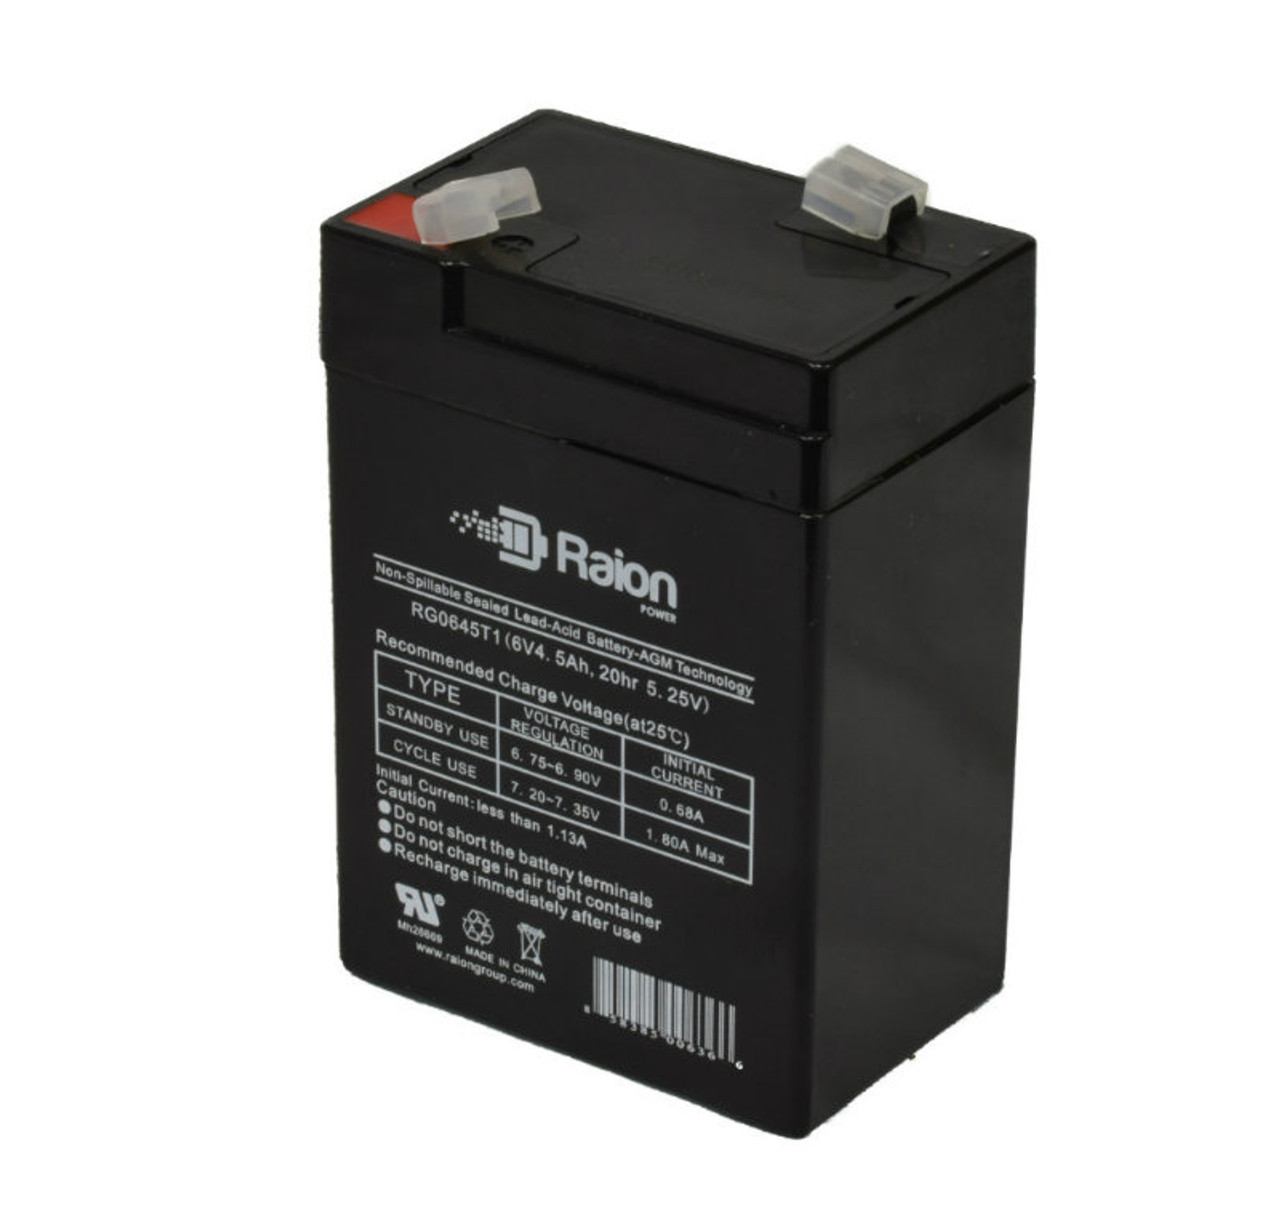 Raion Power RG0645T1 6V 4.5Ah Replacement Battery Cartridge for Chloride 100R010145